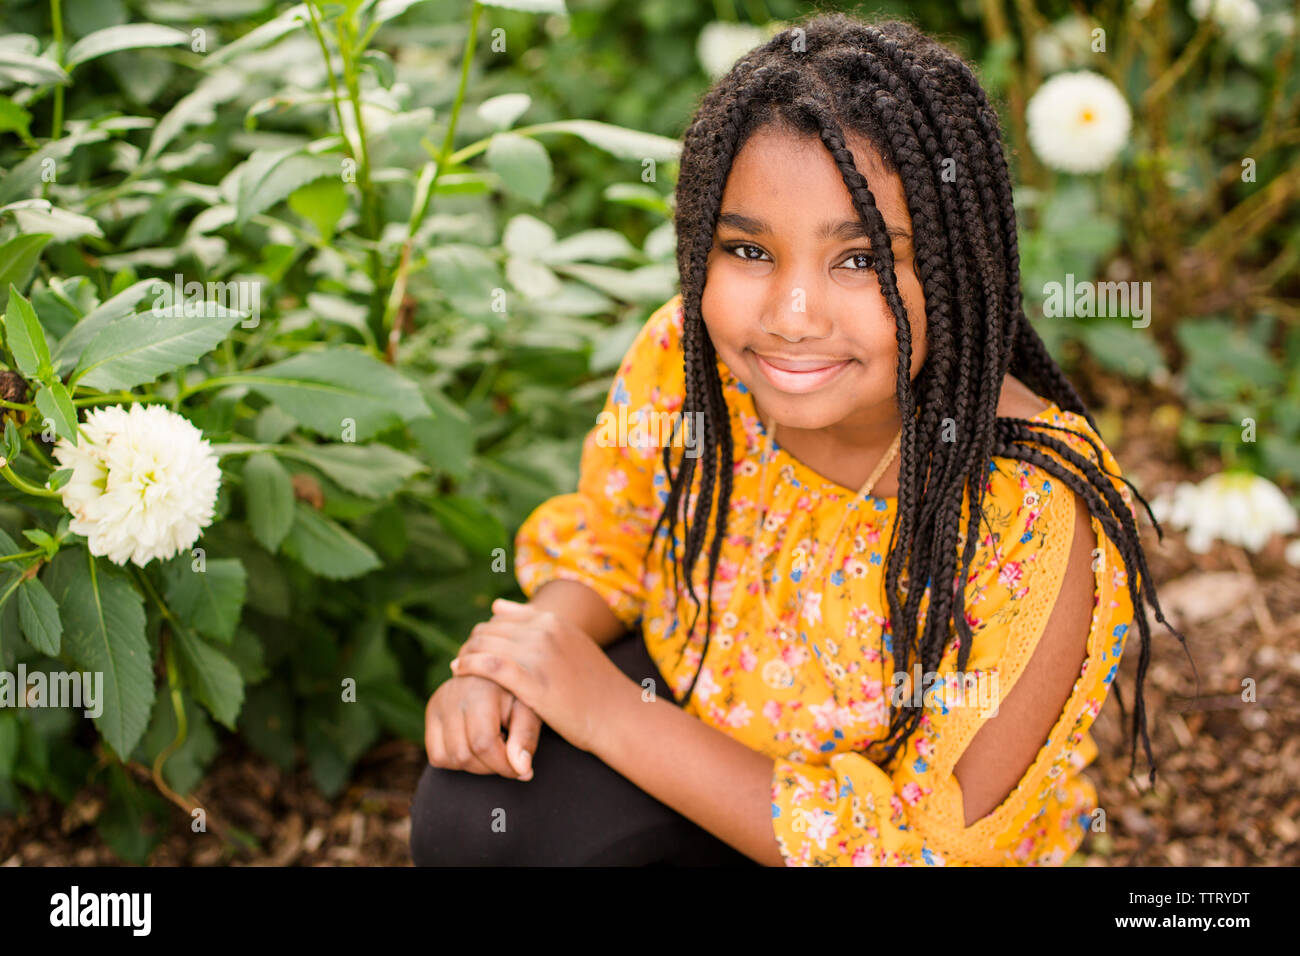 High angle portrait of smiling girl with braided hair crouching by plants in park Stock Photo